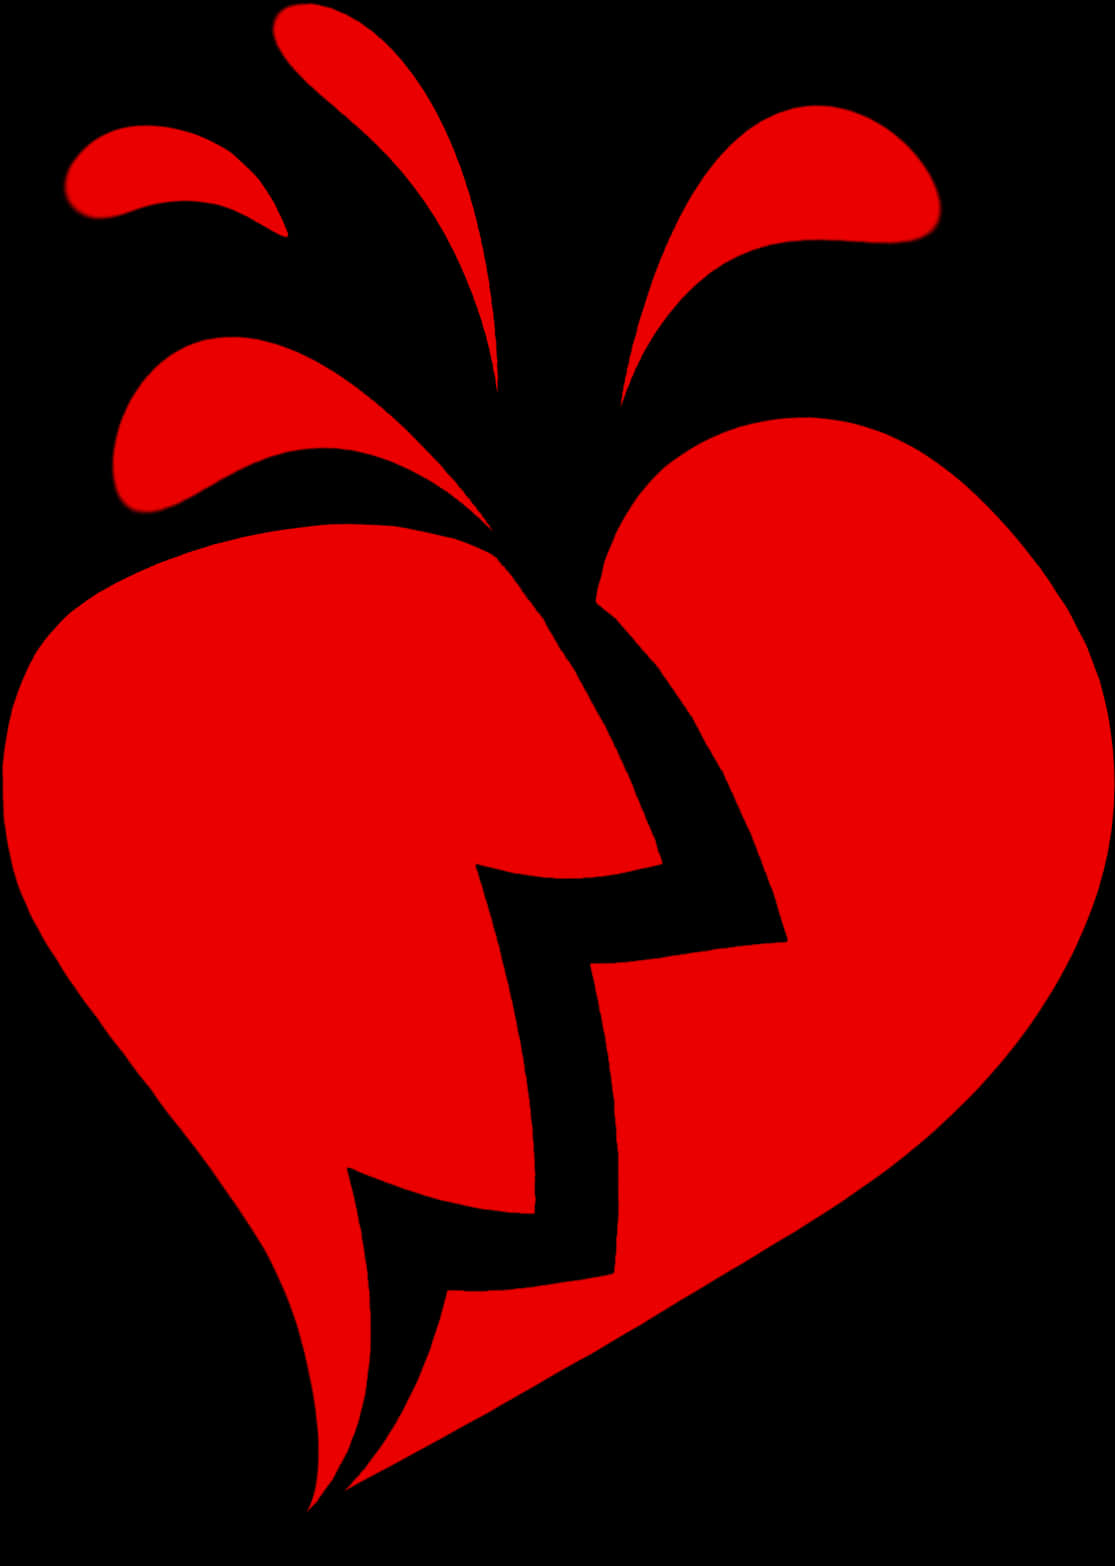 A Red Heart With A Broken Heart